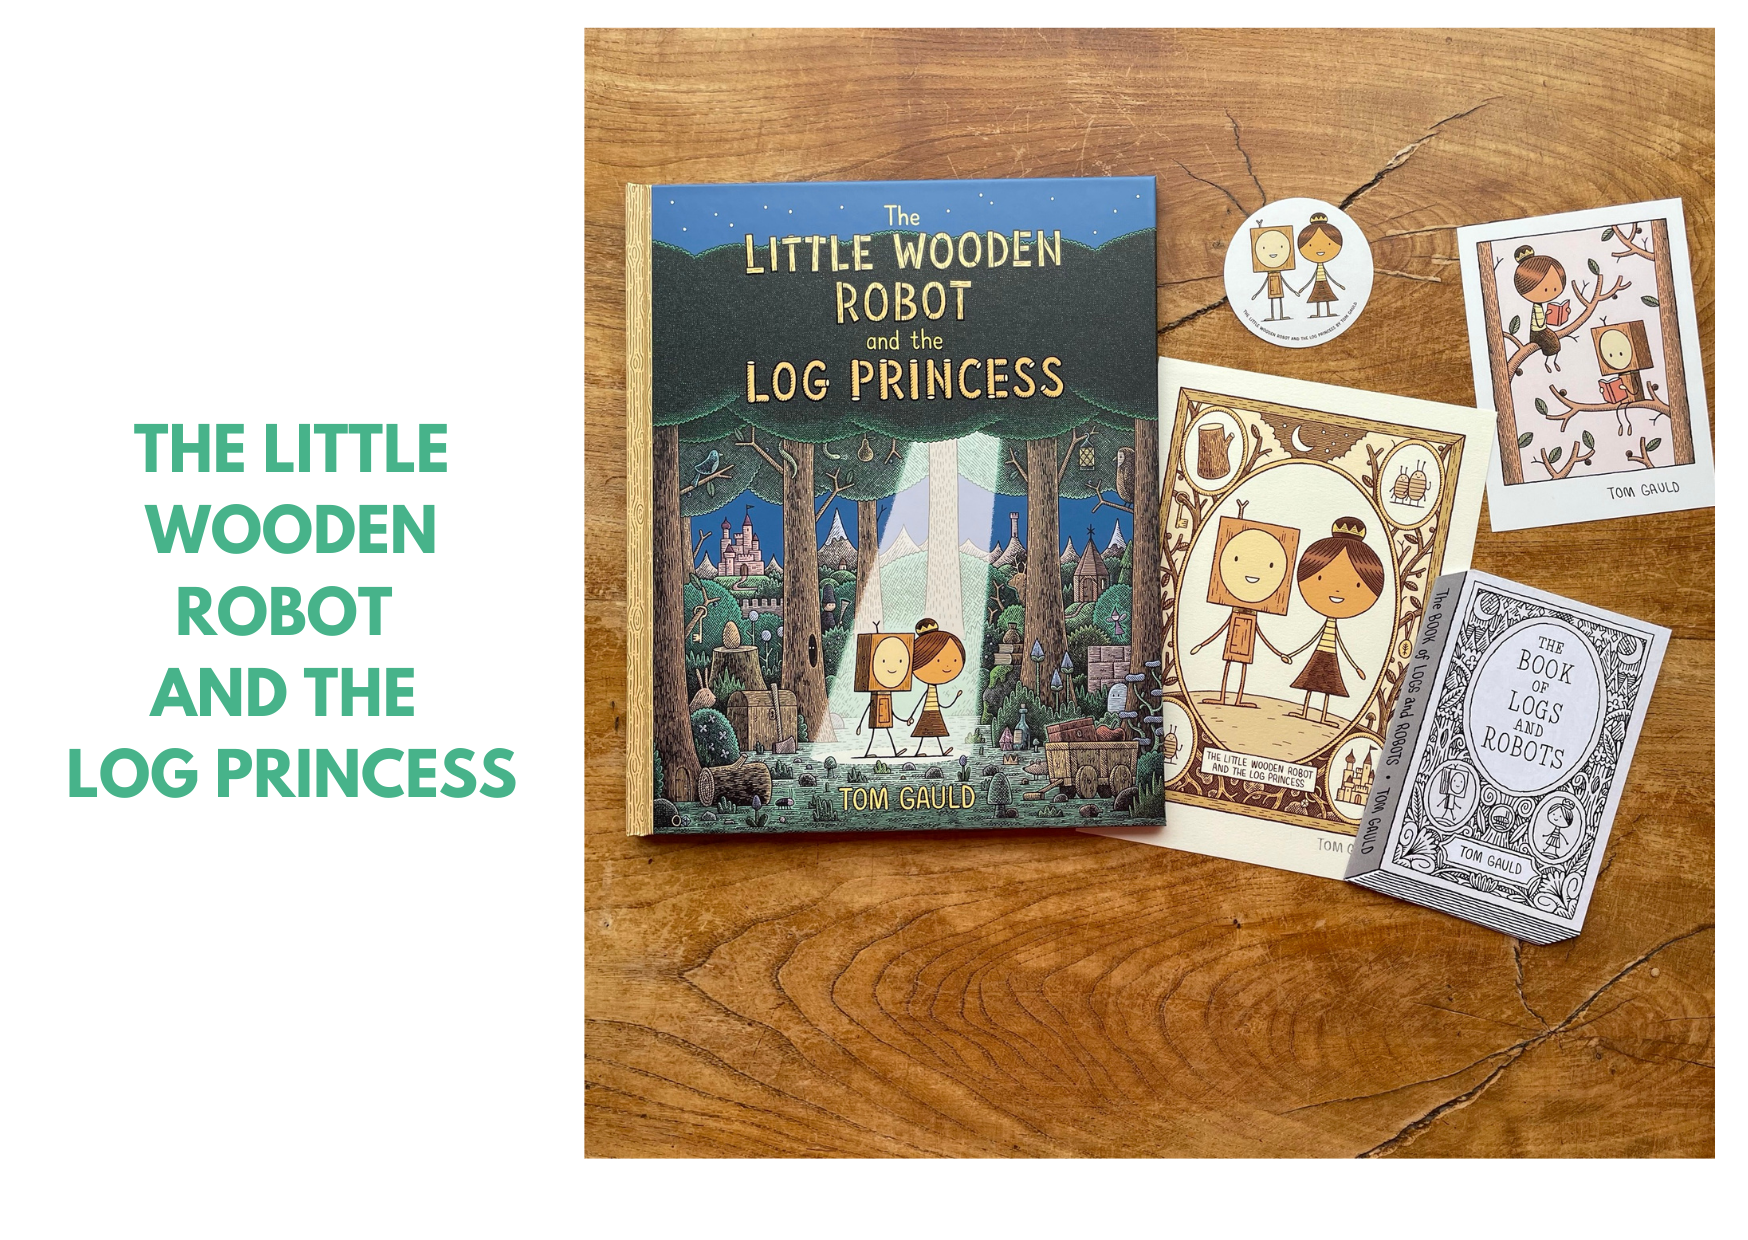 cylinder Supermarked Funktionsfejl The Little Wooden Robot and the Log Princess - BookBairn